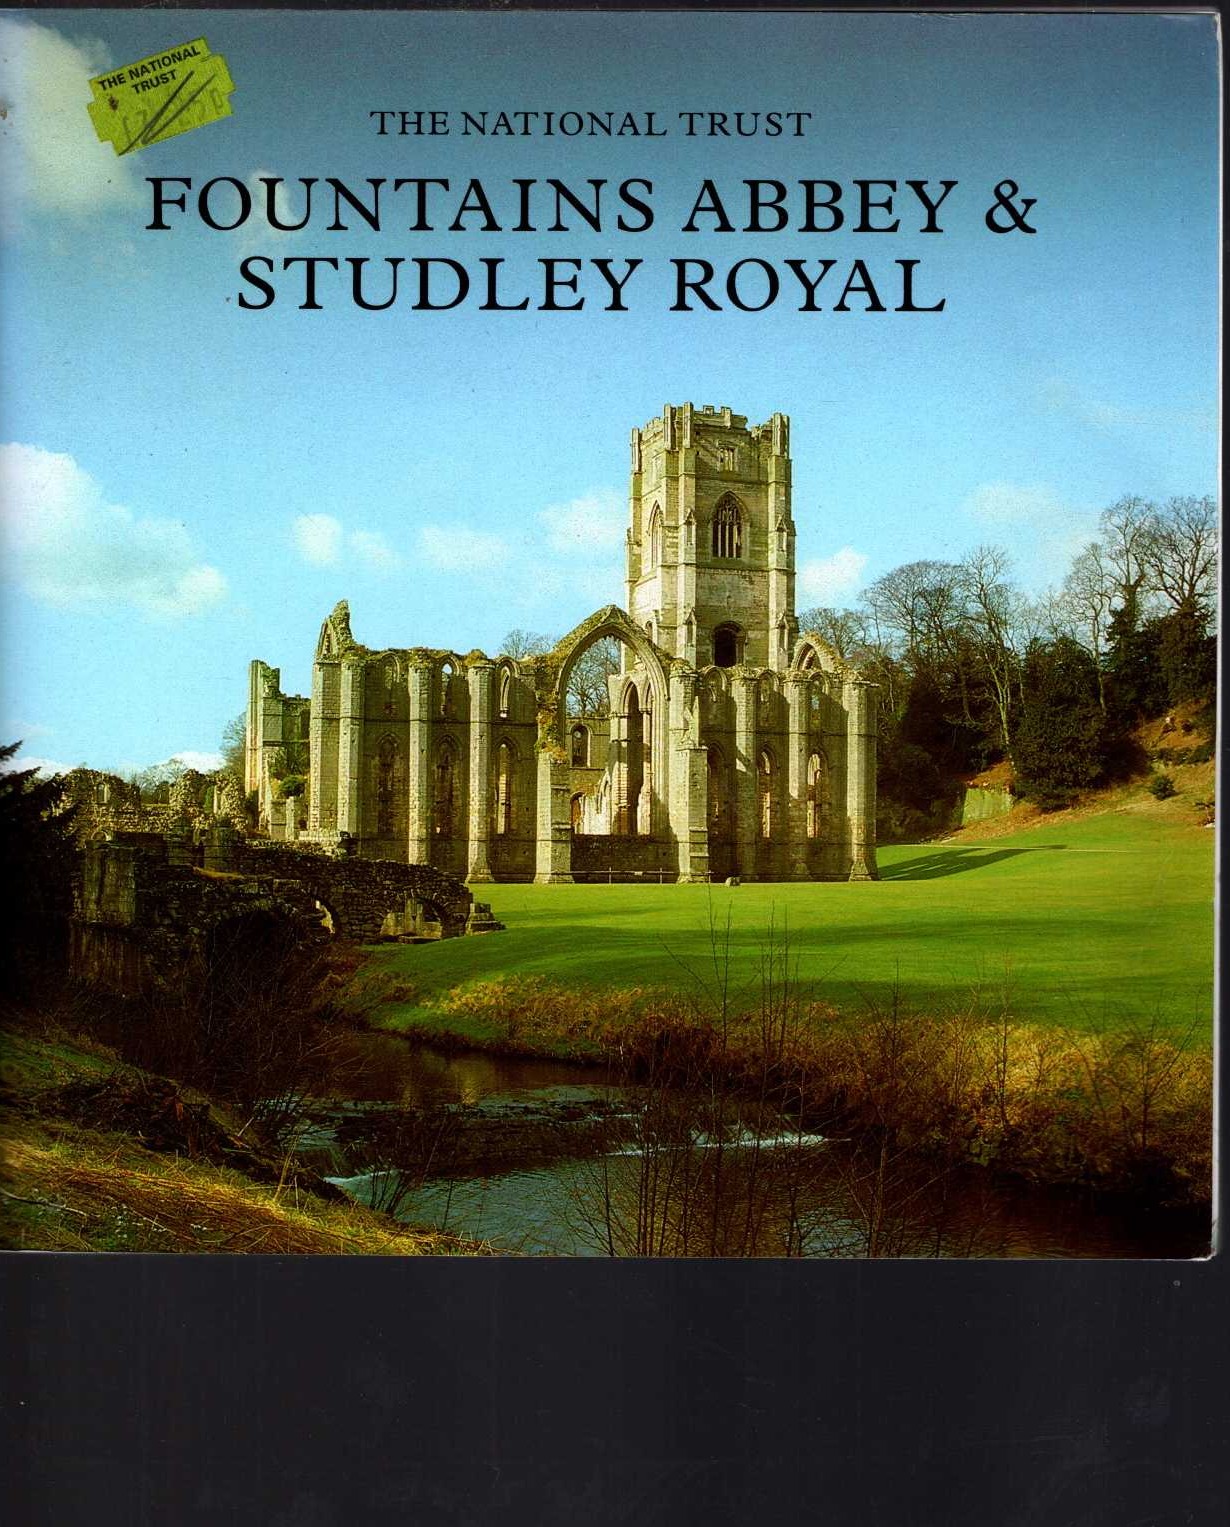 \ FOUNTAINS ABBEY & STUDLEY ROYAL by The National Trust front book cover image